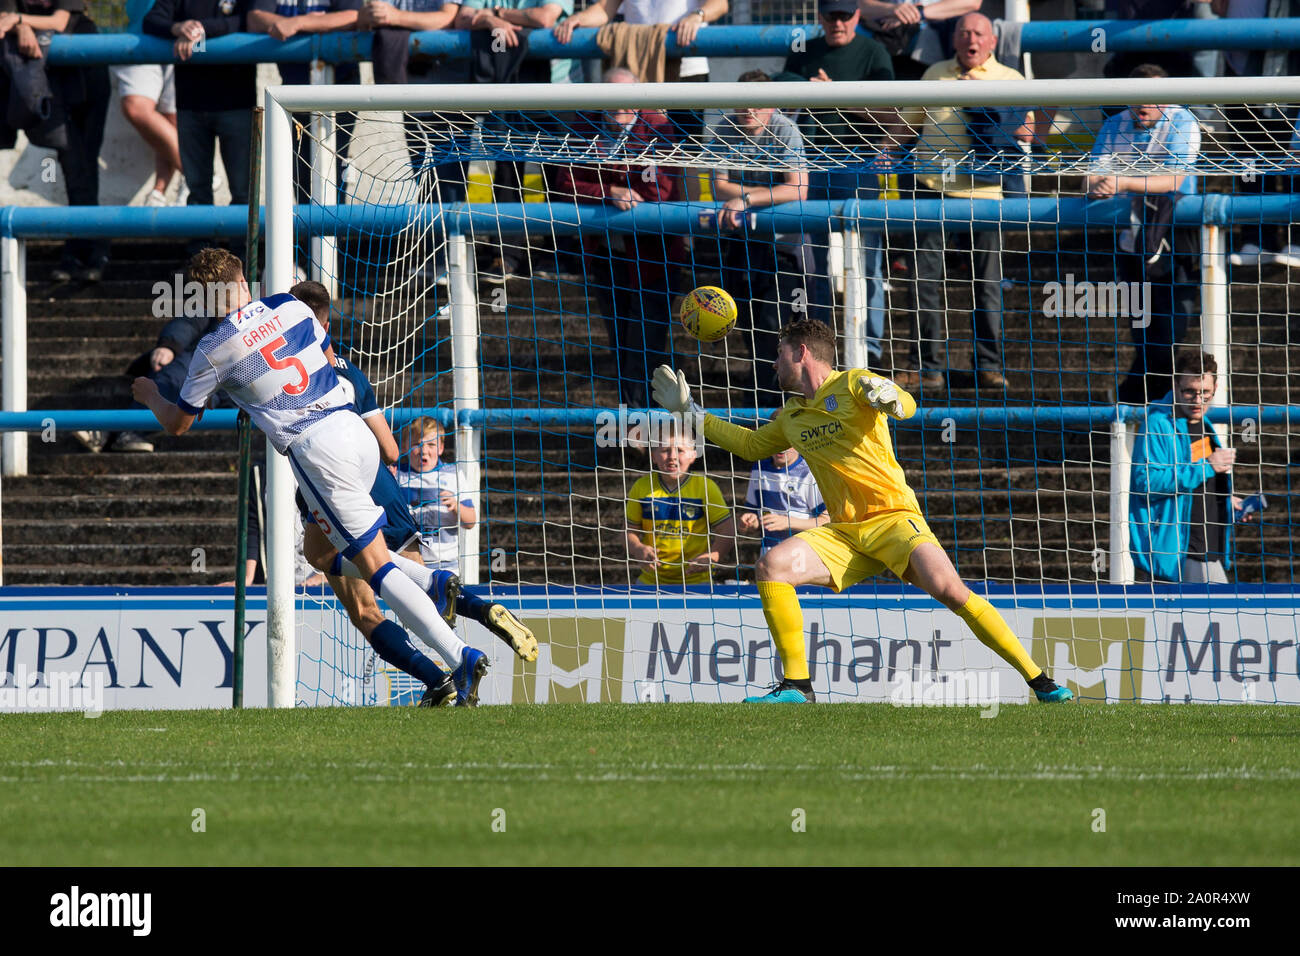 Greenock, Scotland, UK.  21st September 2019; Cappielow Park, Greenock, Inverclyde, Scotland; Scottish Championship Football, Greenock Morton Football Club versus Dundee Football Club; Peter Grant of Greenock Morton scores for 1-0 past goalkeeper Siegrist in the 45th minute Credit: Action Plus Sports Images/Alamy Live News Credit: Action Plus Sports Images/Alamy Live News Credit: Action Plus Sports Images/Alamy Live News Stock Photo